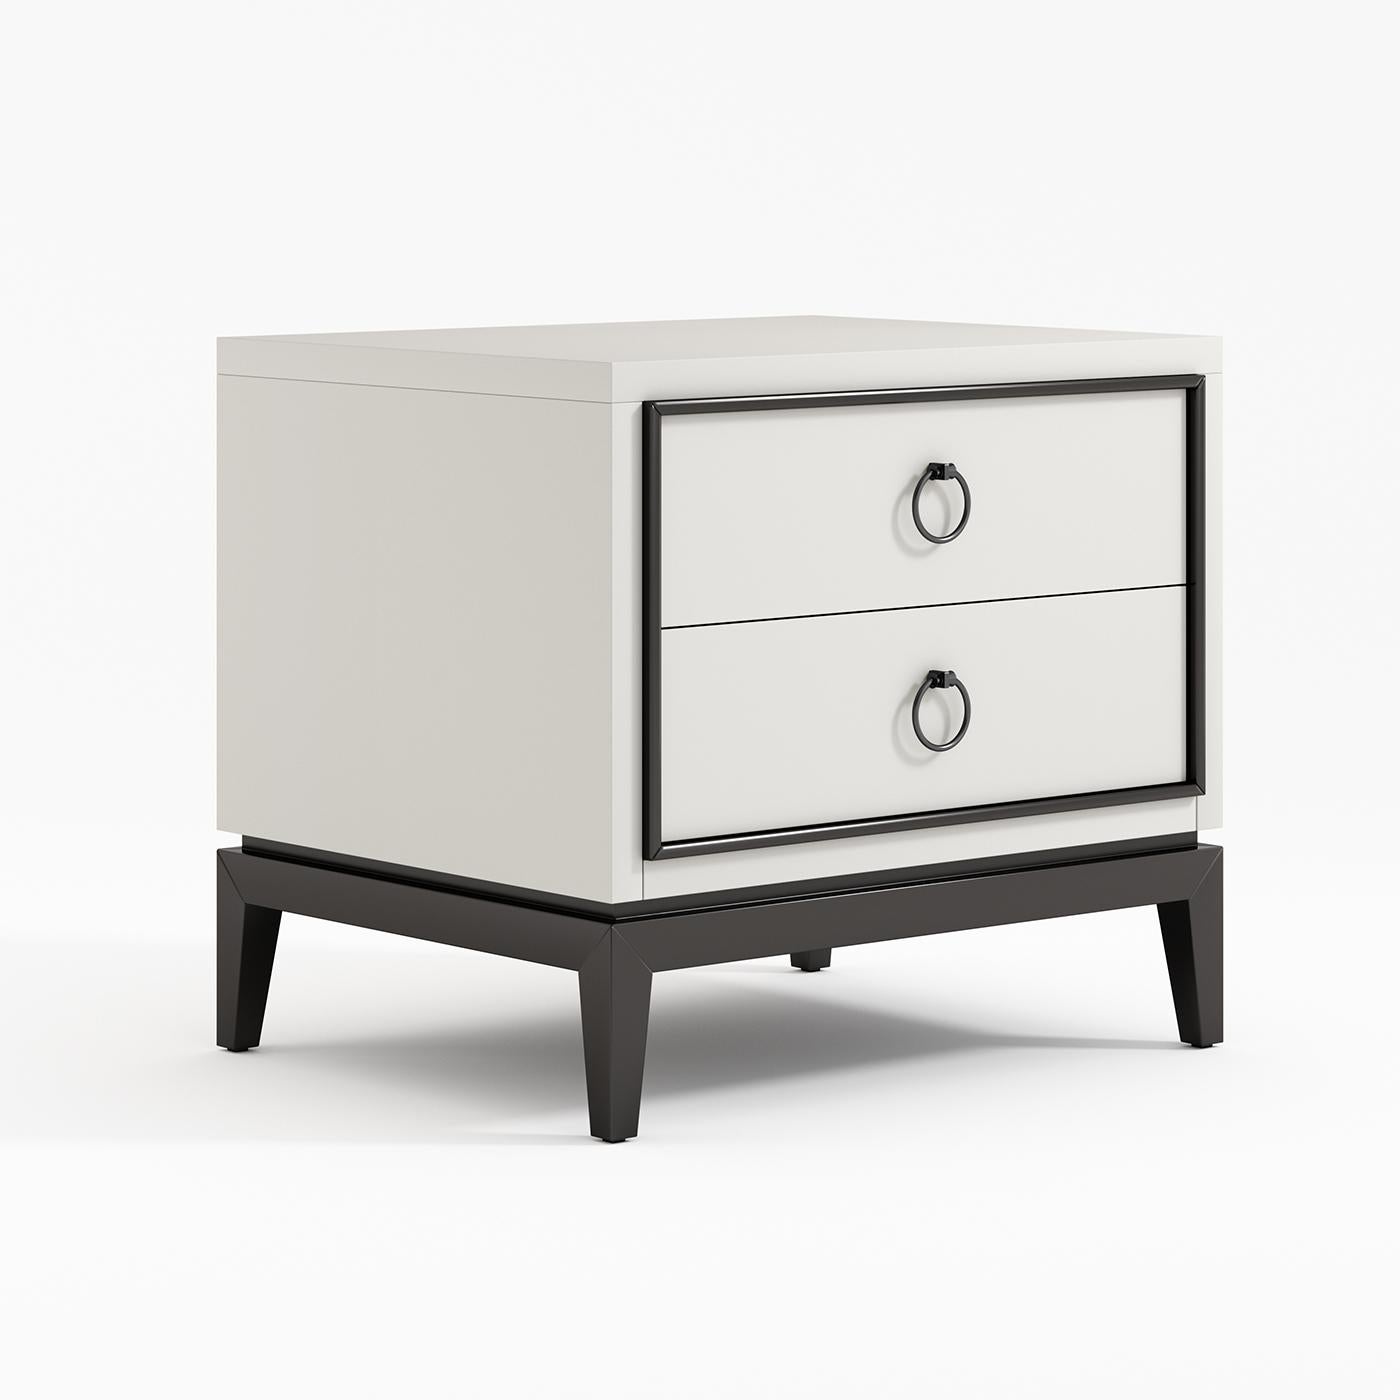 This stunning nightstand is an ideal complement piece to the other Asmara White Furniture. Its wooden structure boasts a simple silhouette, highlighted by the used of two contrasting lacquers in black and white. The base and profiles are in solid